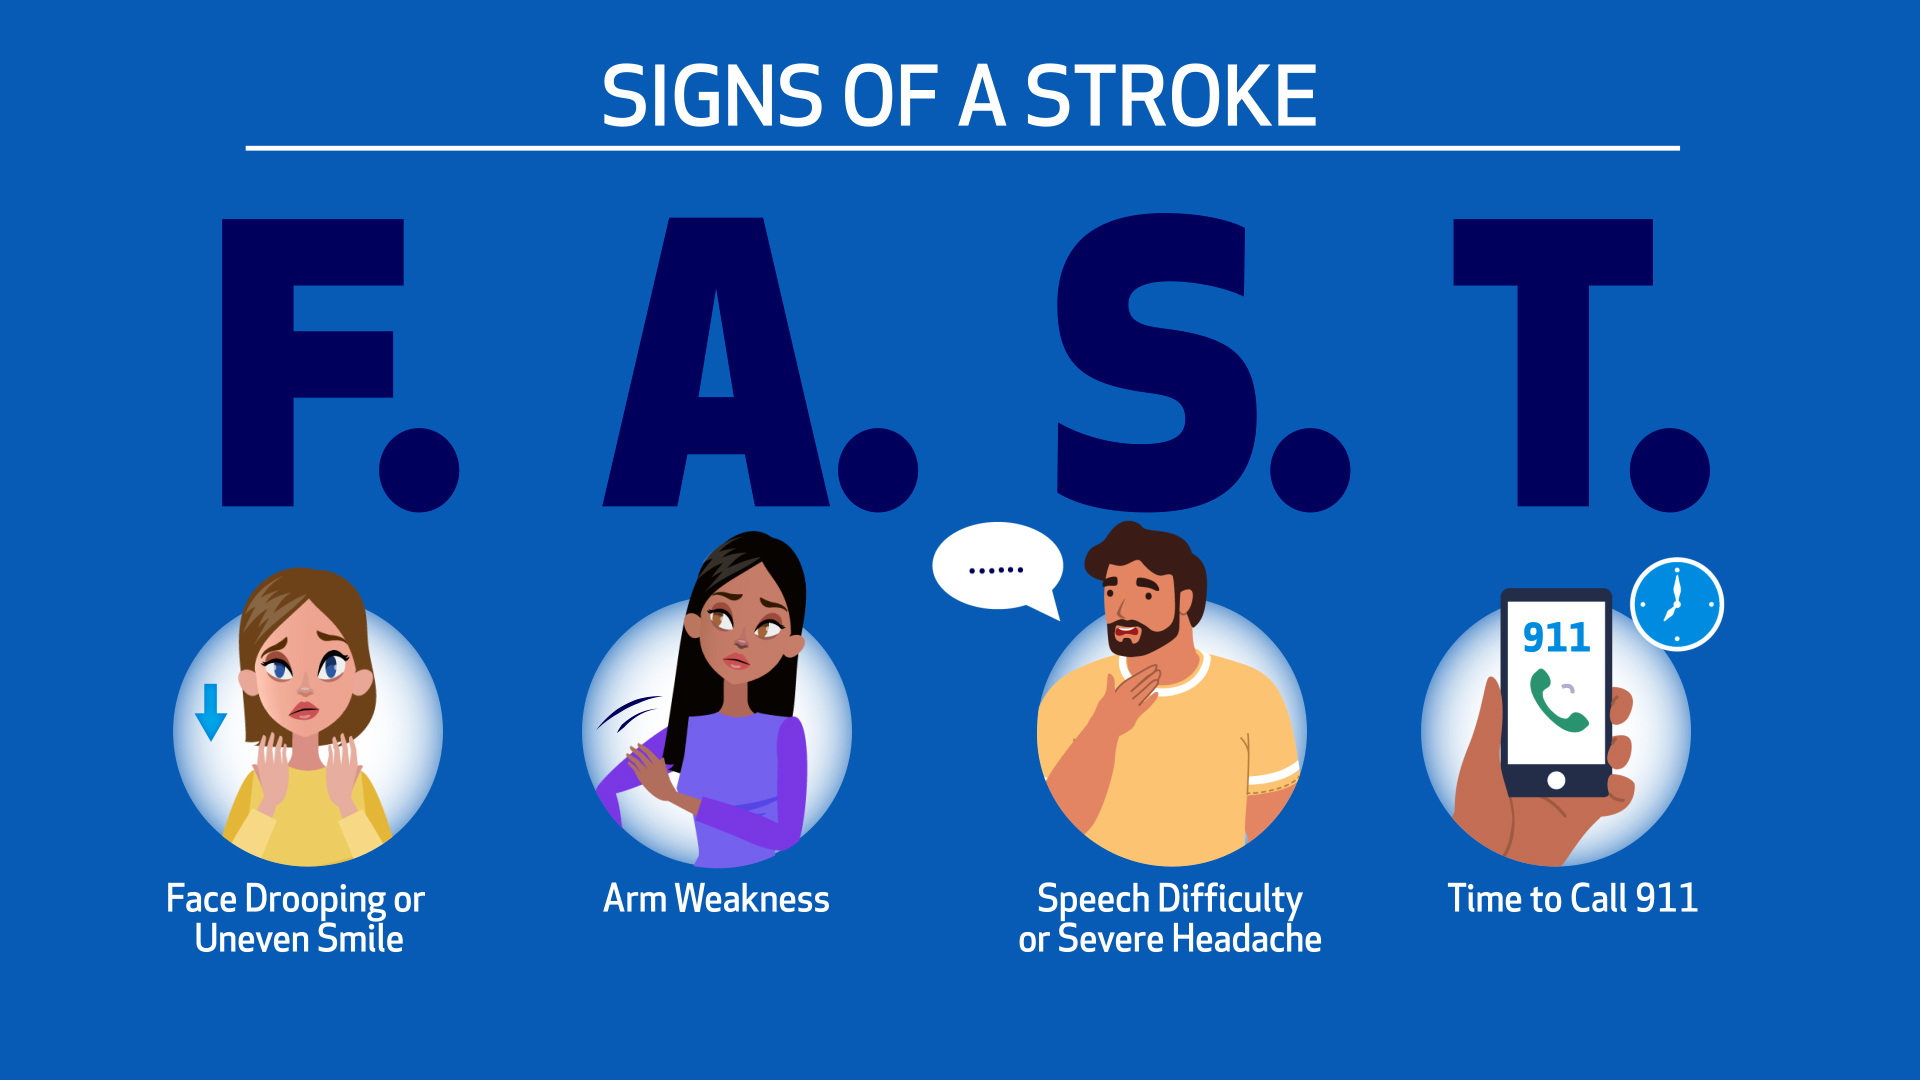 Stroke signs graphic